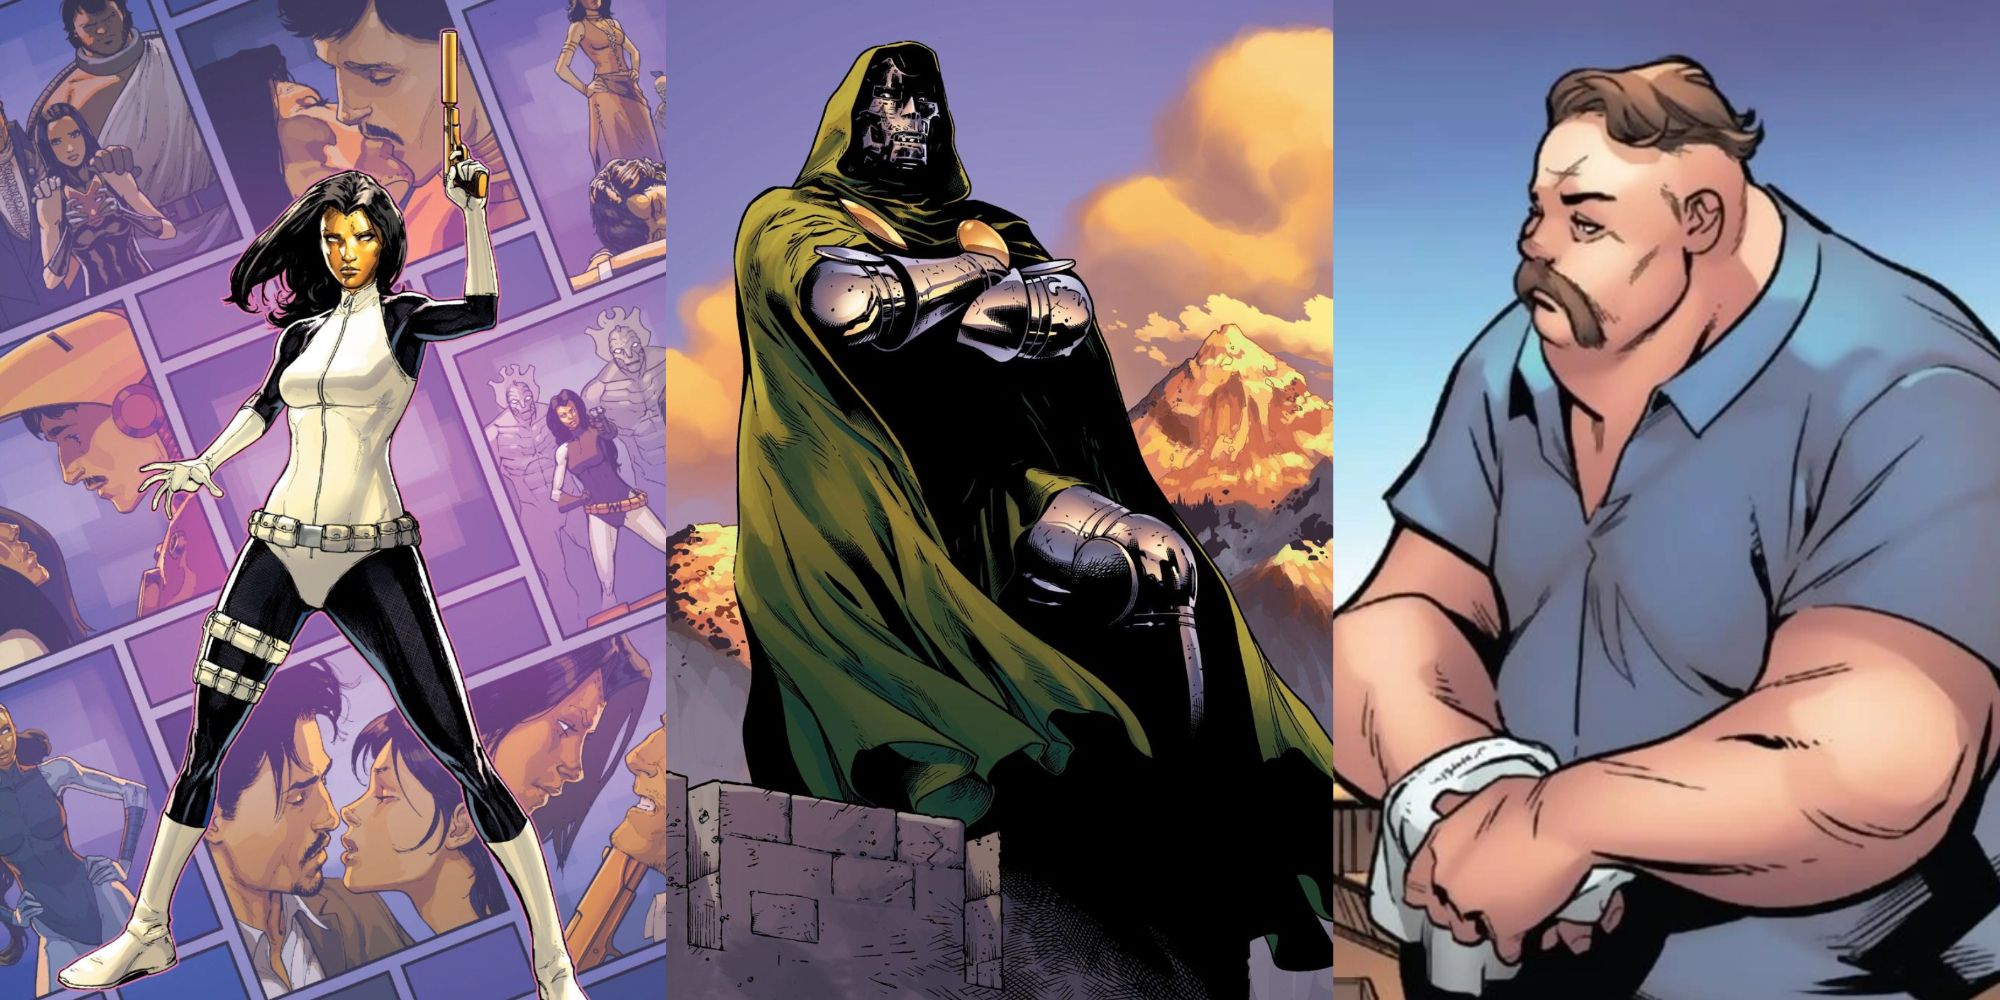 Left to right: Madame Masque, Doctor Doom, and Blob in Marvel Comics